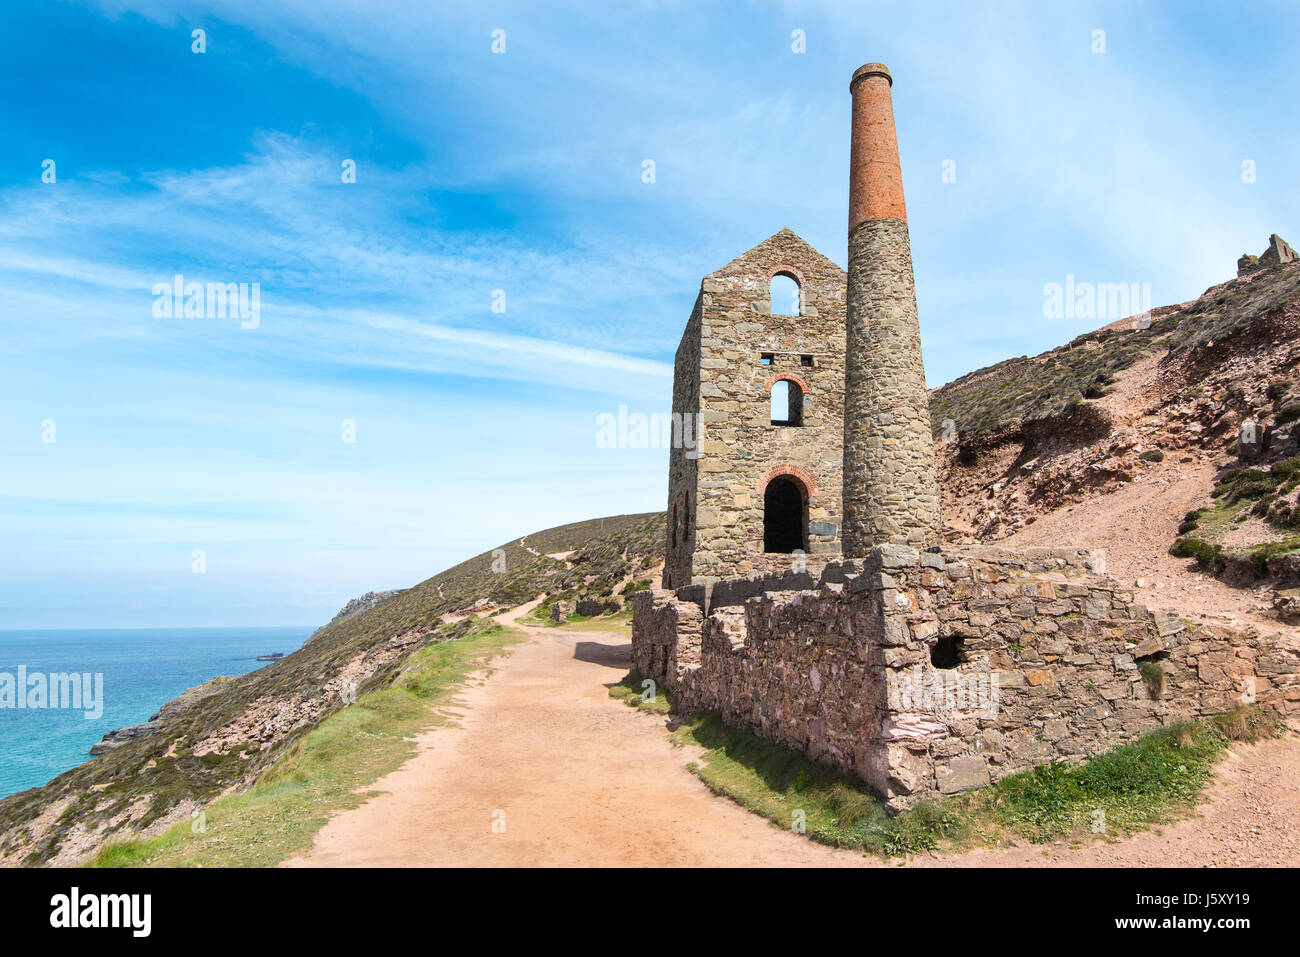 CHAPEL PORTH, CORNWALL, UK - 24APR2017: The Towanroath Engine House at Wheal Coates is sited adjacent to the South West Coastal Footpath. Stock Photo